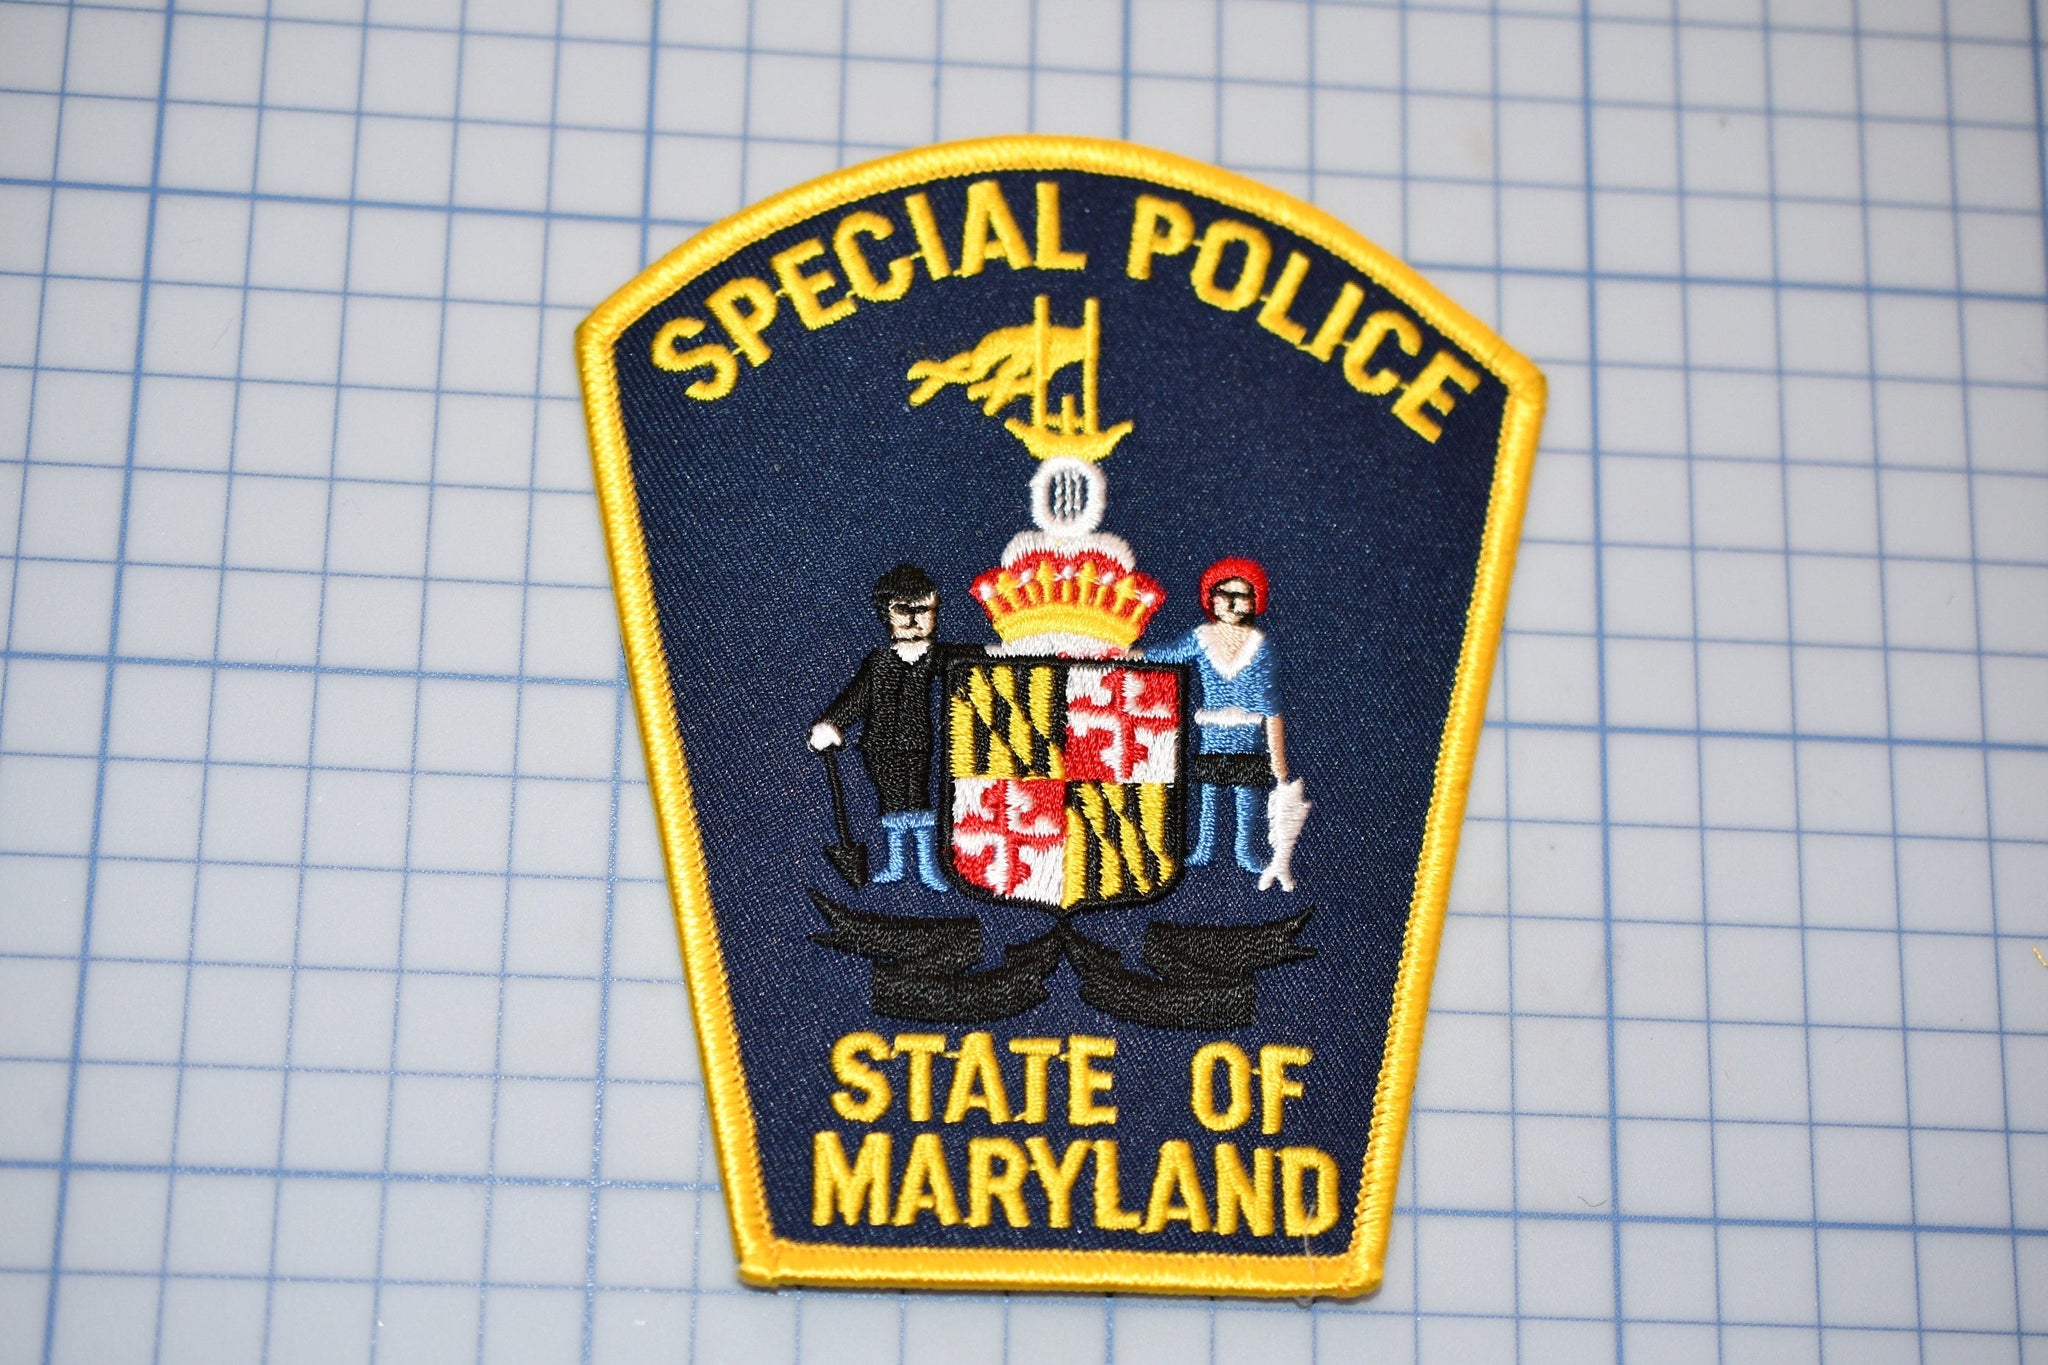 State Of Maryland Special Police Patch (B27-306)